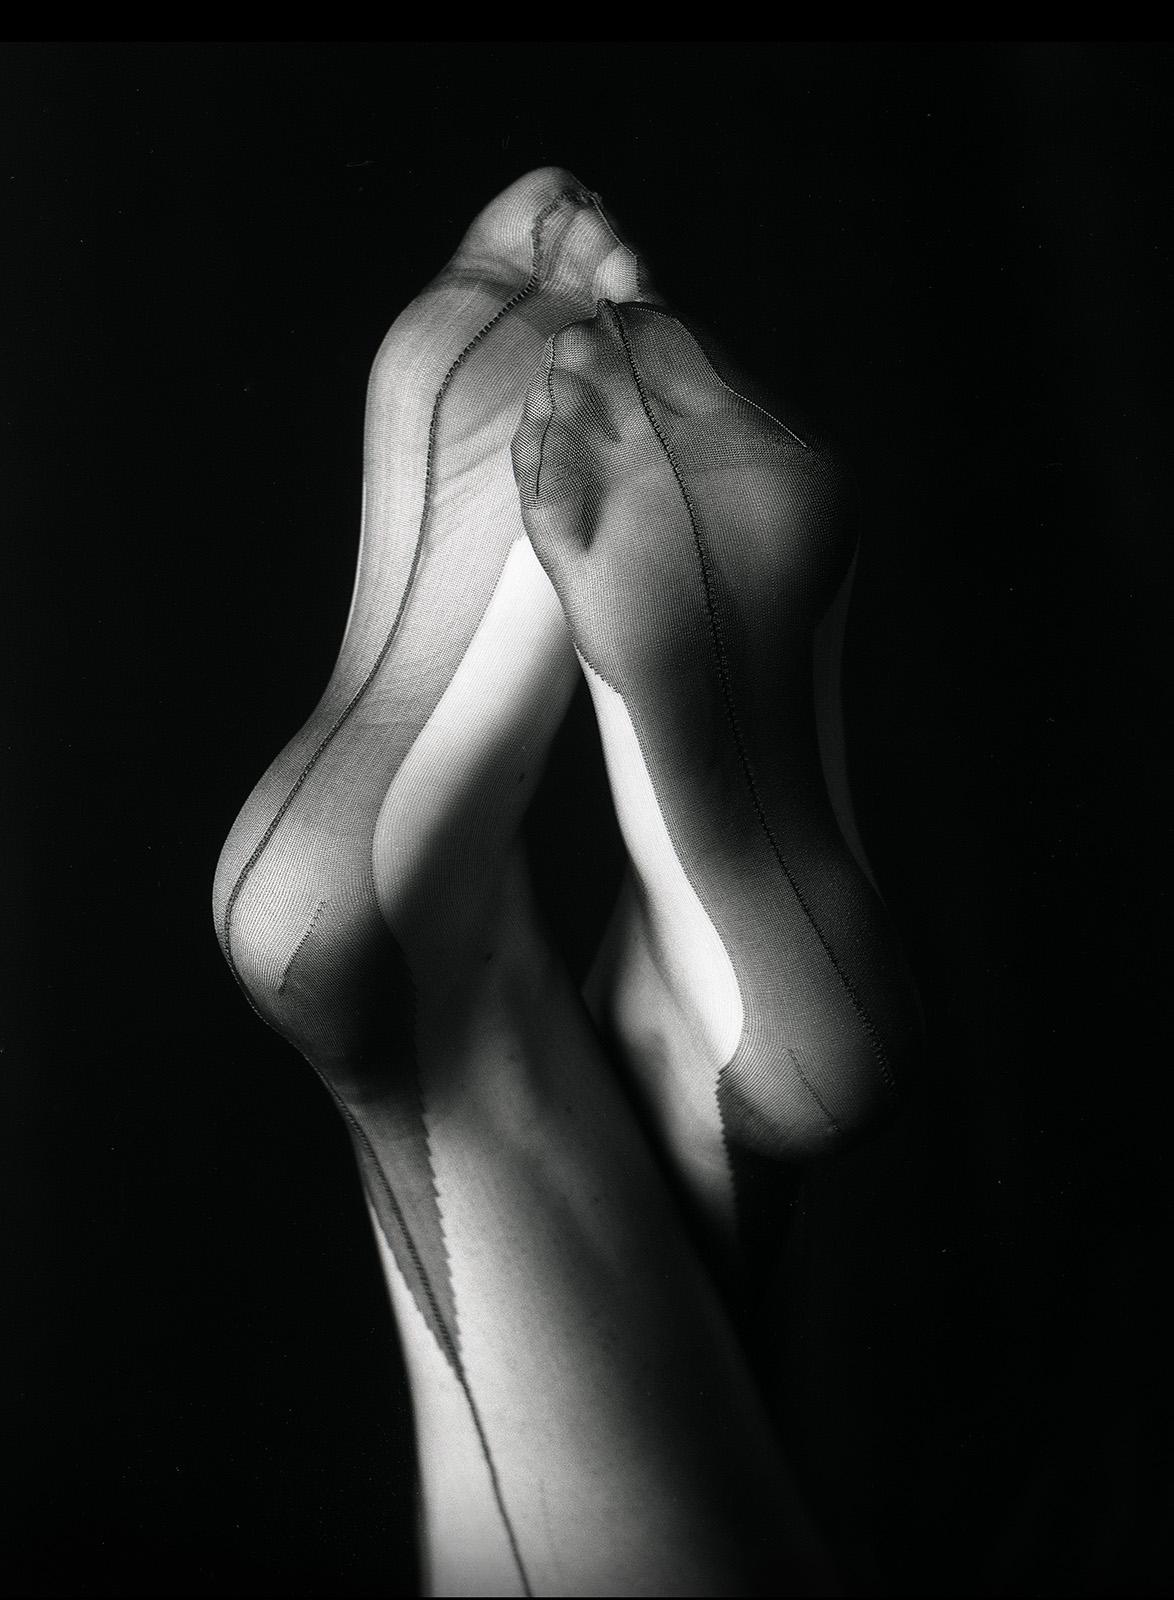 Geoff Halpin Black and White Photograph - Put Your Feet Up - Signed limited edition still life fine art print, black white